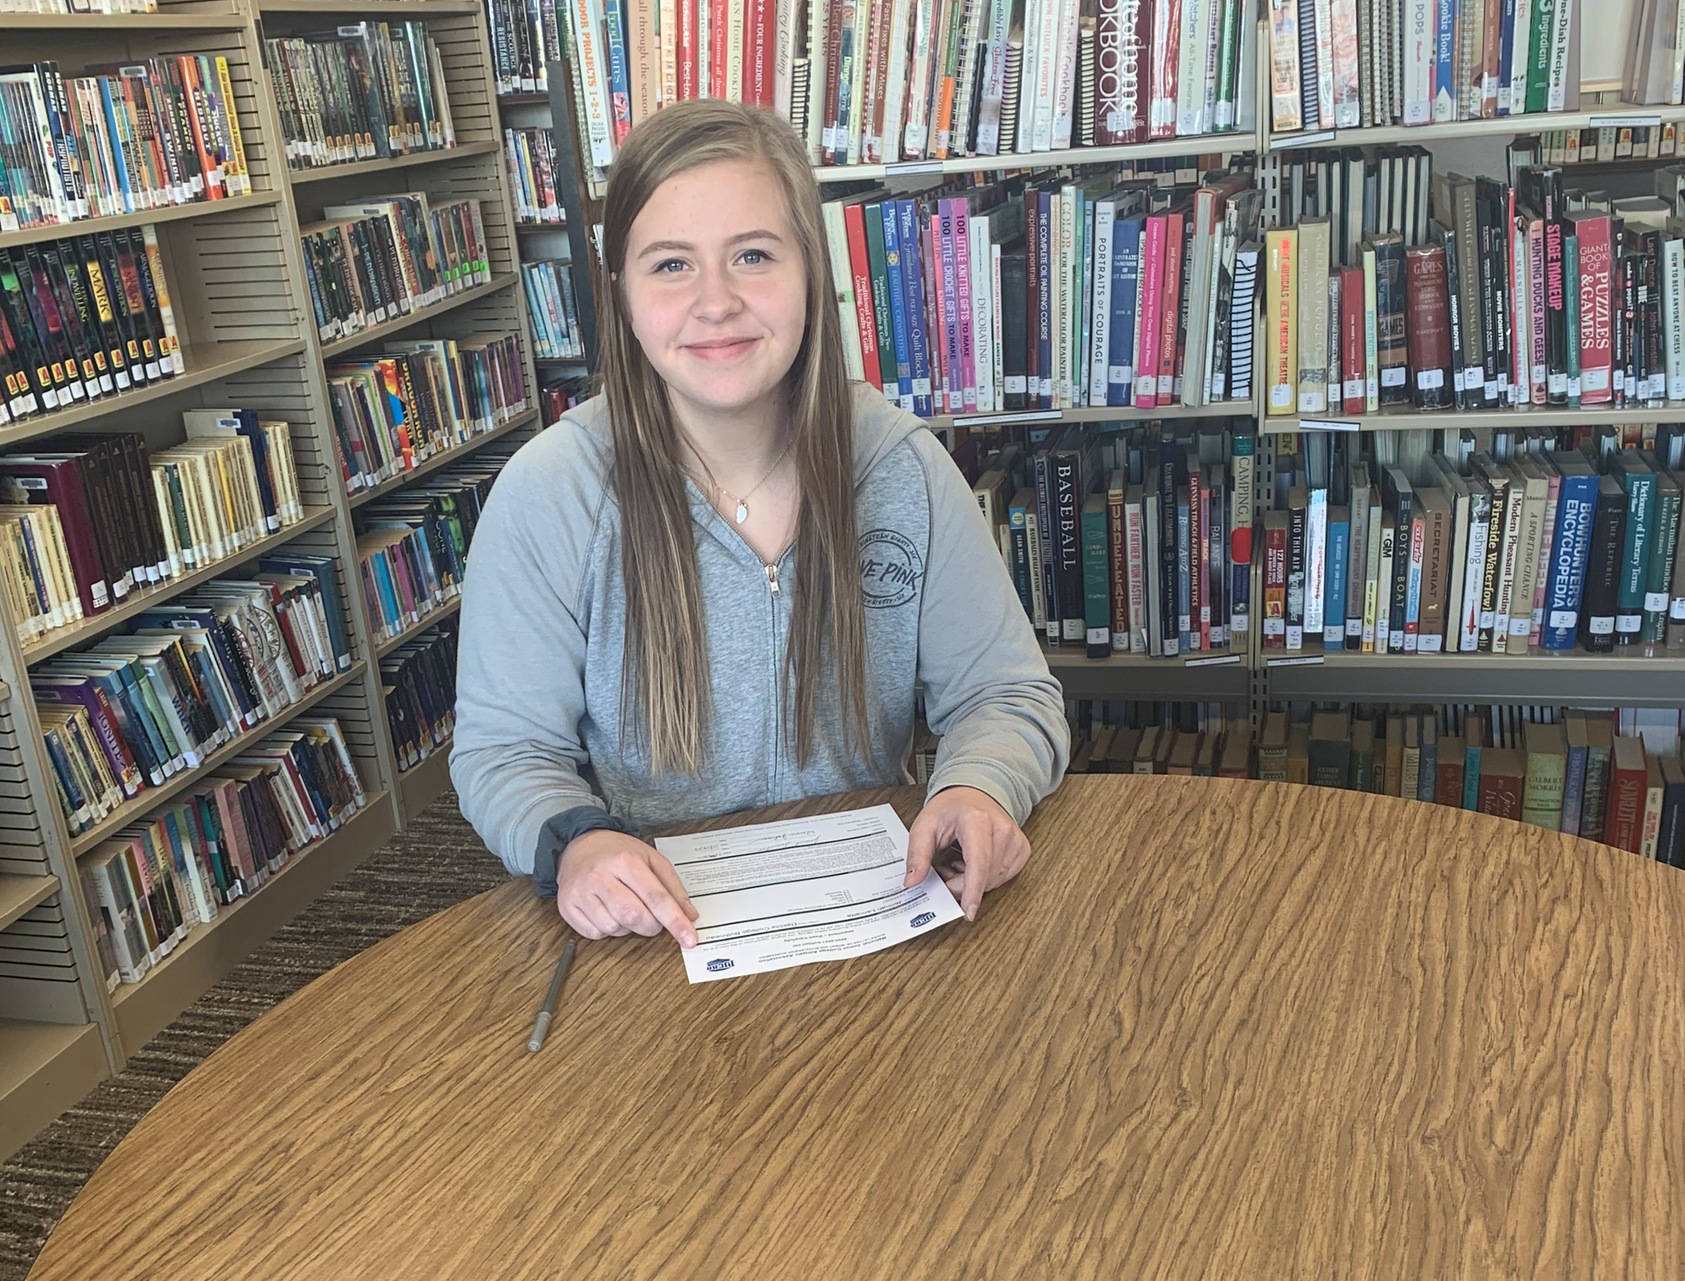 Fessenden-Bowden Senior Jennah Lematta signs an NJCAA Letter of Intent to play softball for the Ladyjacks in the 2020-21 season.